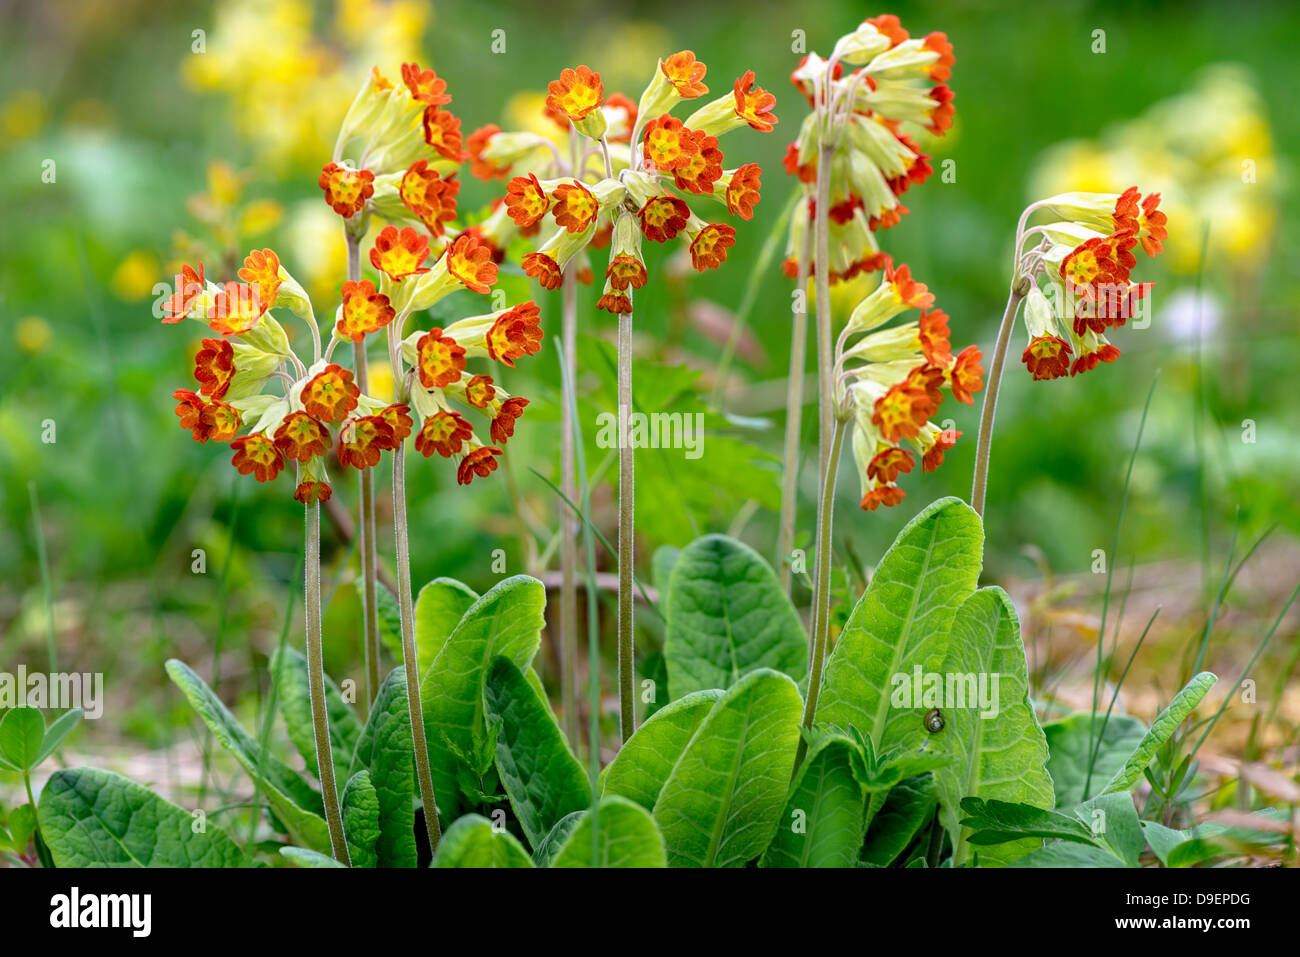 Red-flowered Primula Veris plants or Cowslip, Sweden Stock Photo